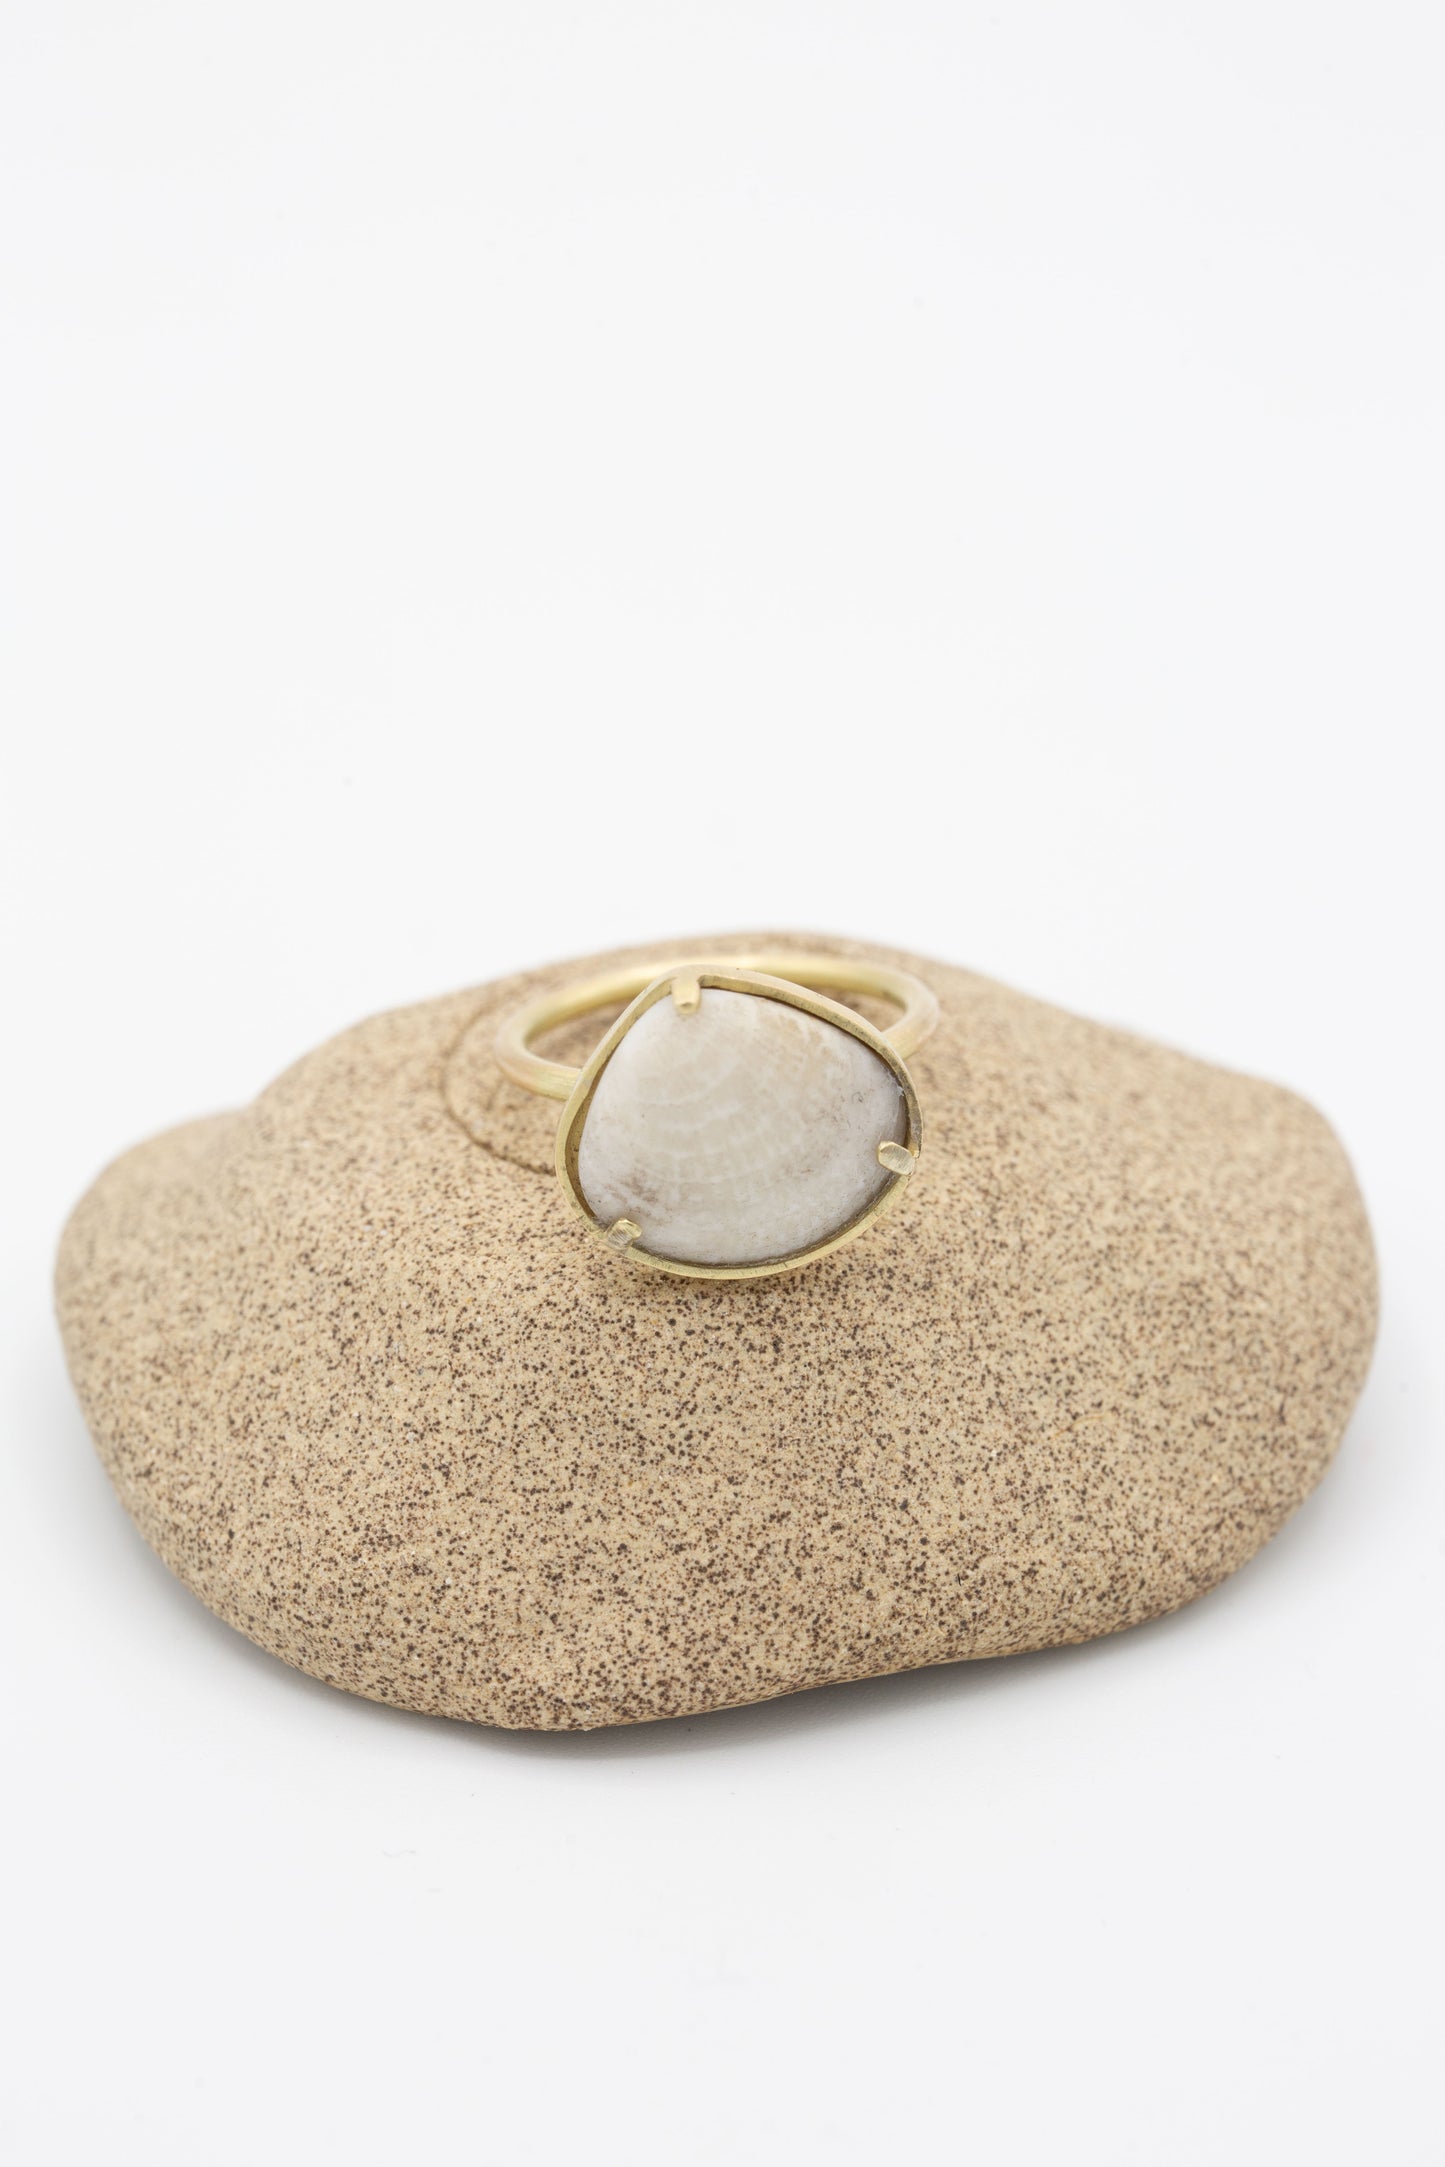 A La Ma r 14K Gold Ring 015 B with a white stone on top of a rock.